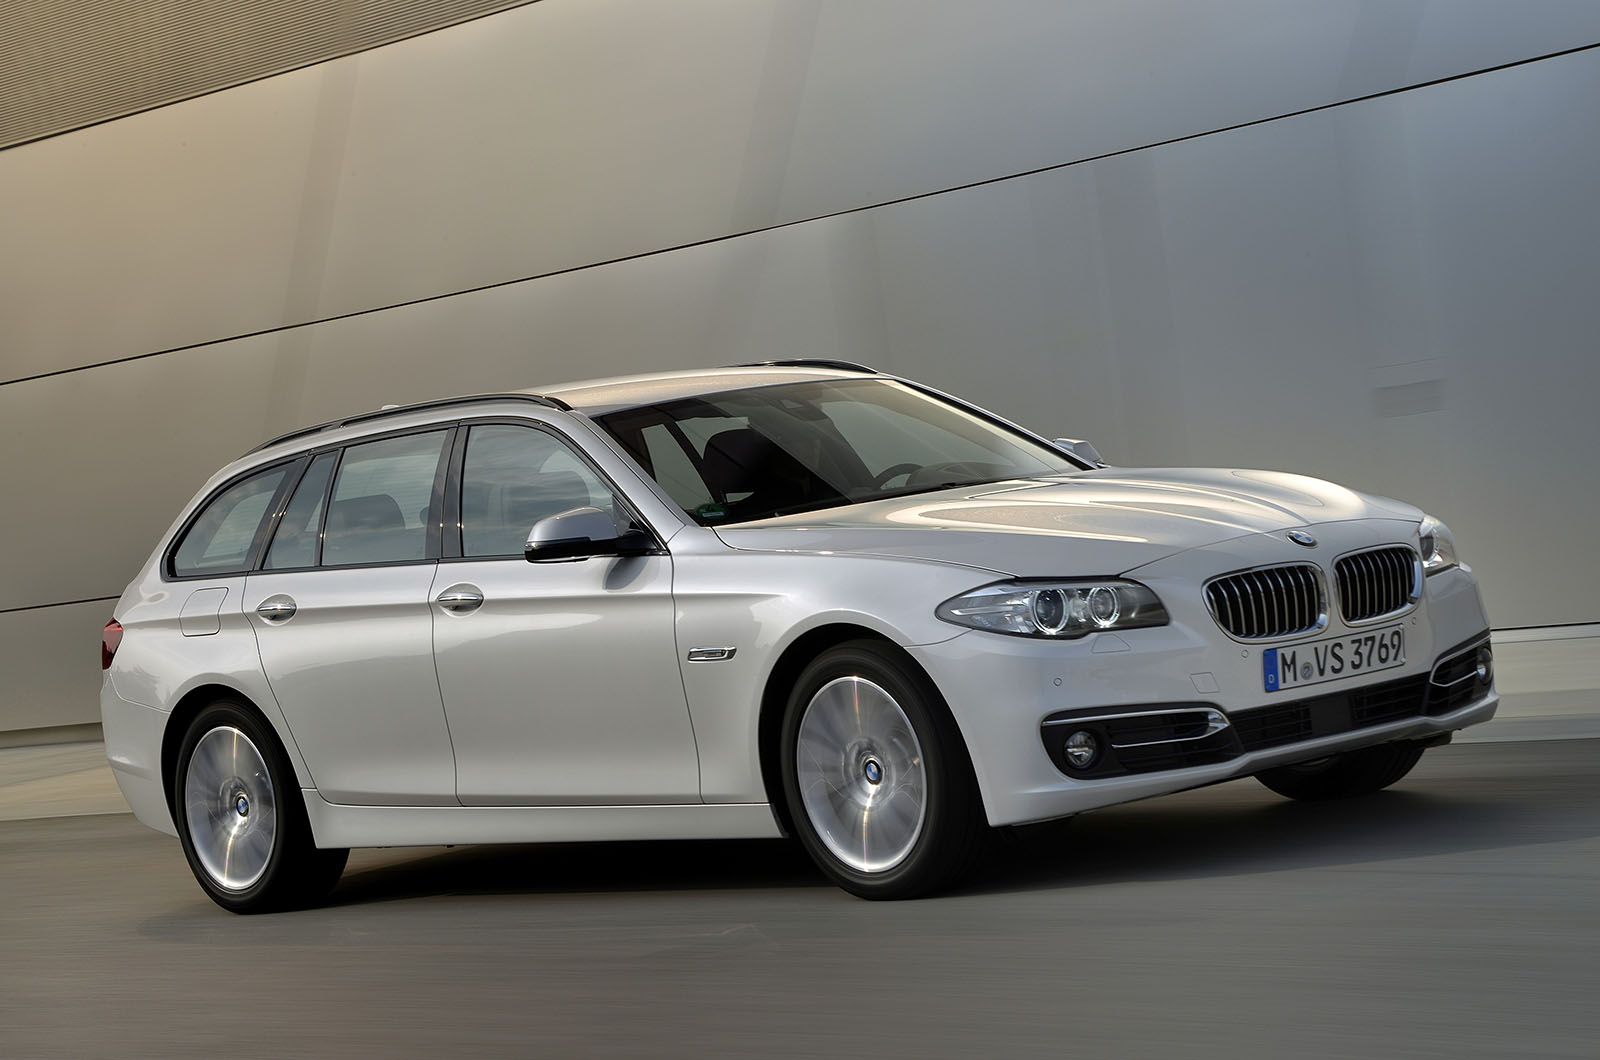 Used bmw 520d touring review #1